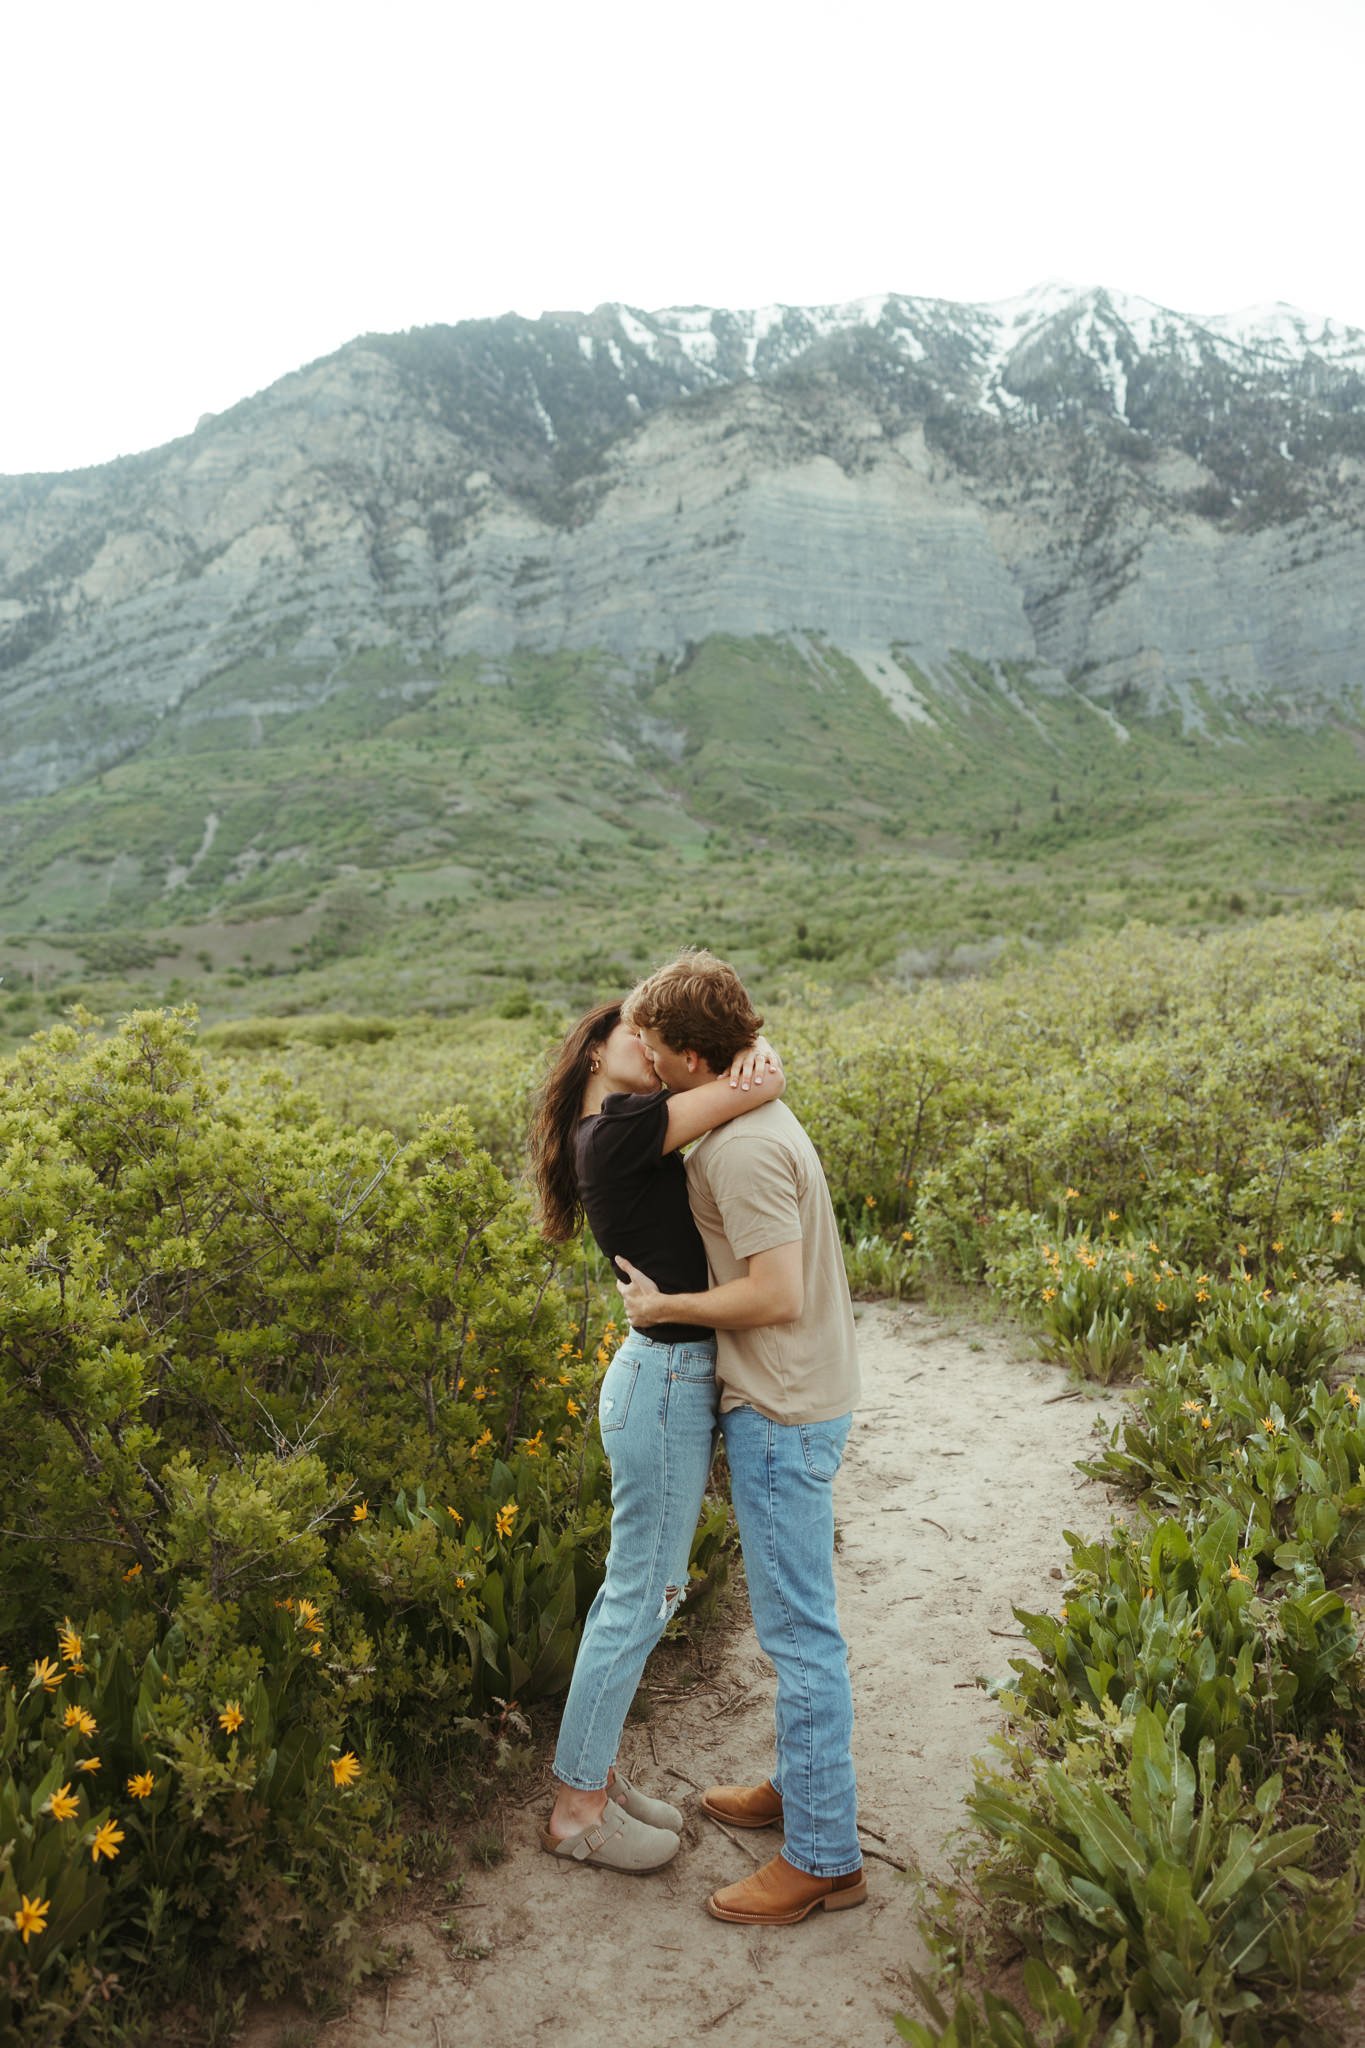 Spring-Provo-Canyon-Wildflowers-Engagement-Session-35